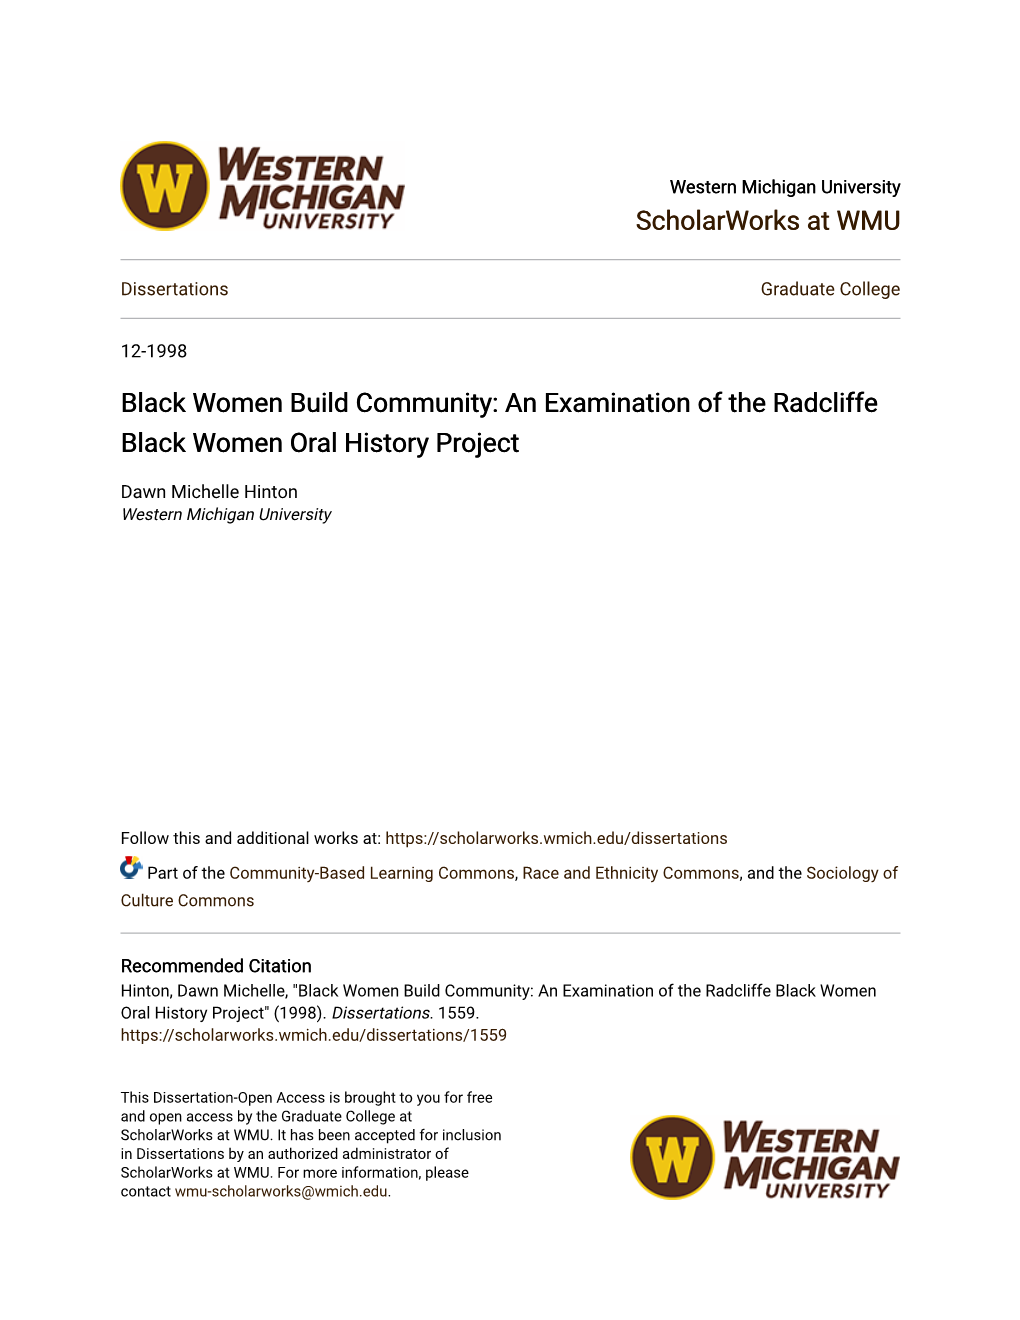 An Examination of the Radcliffe Black Women Oral History Project